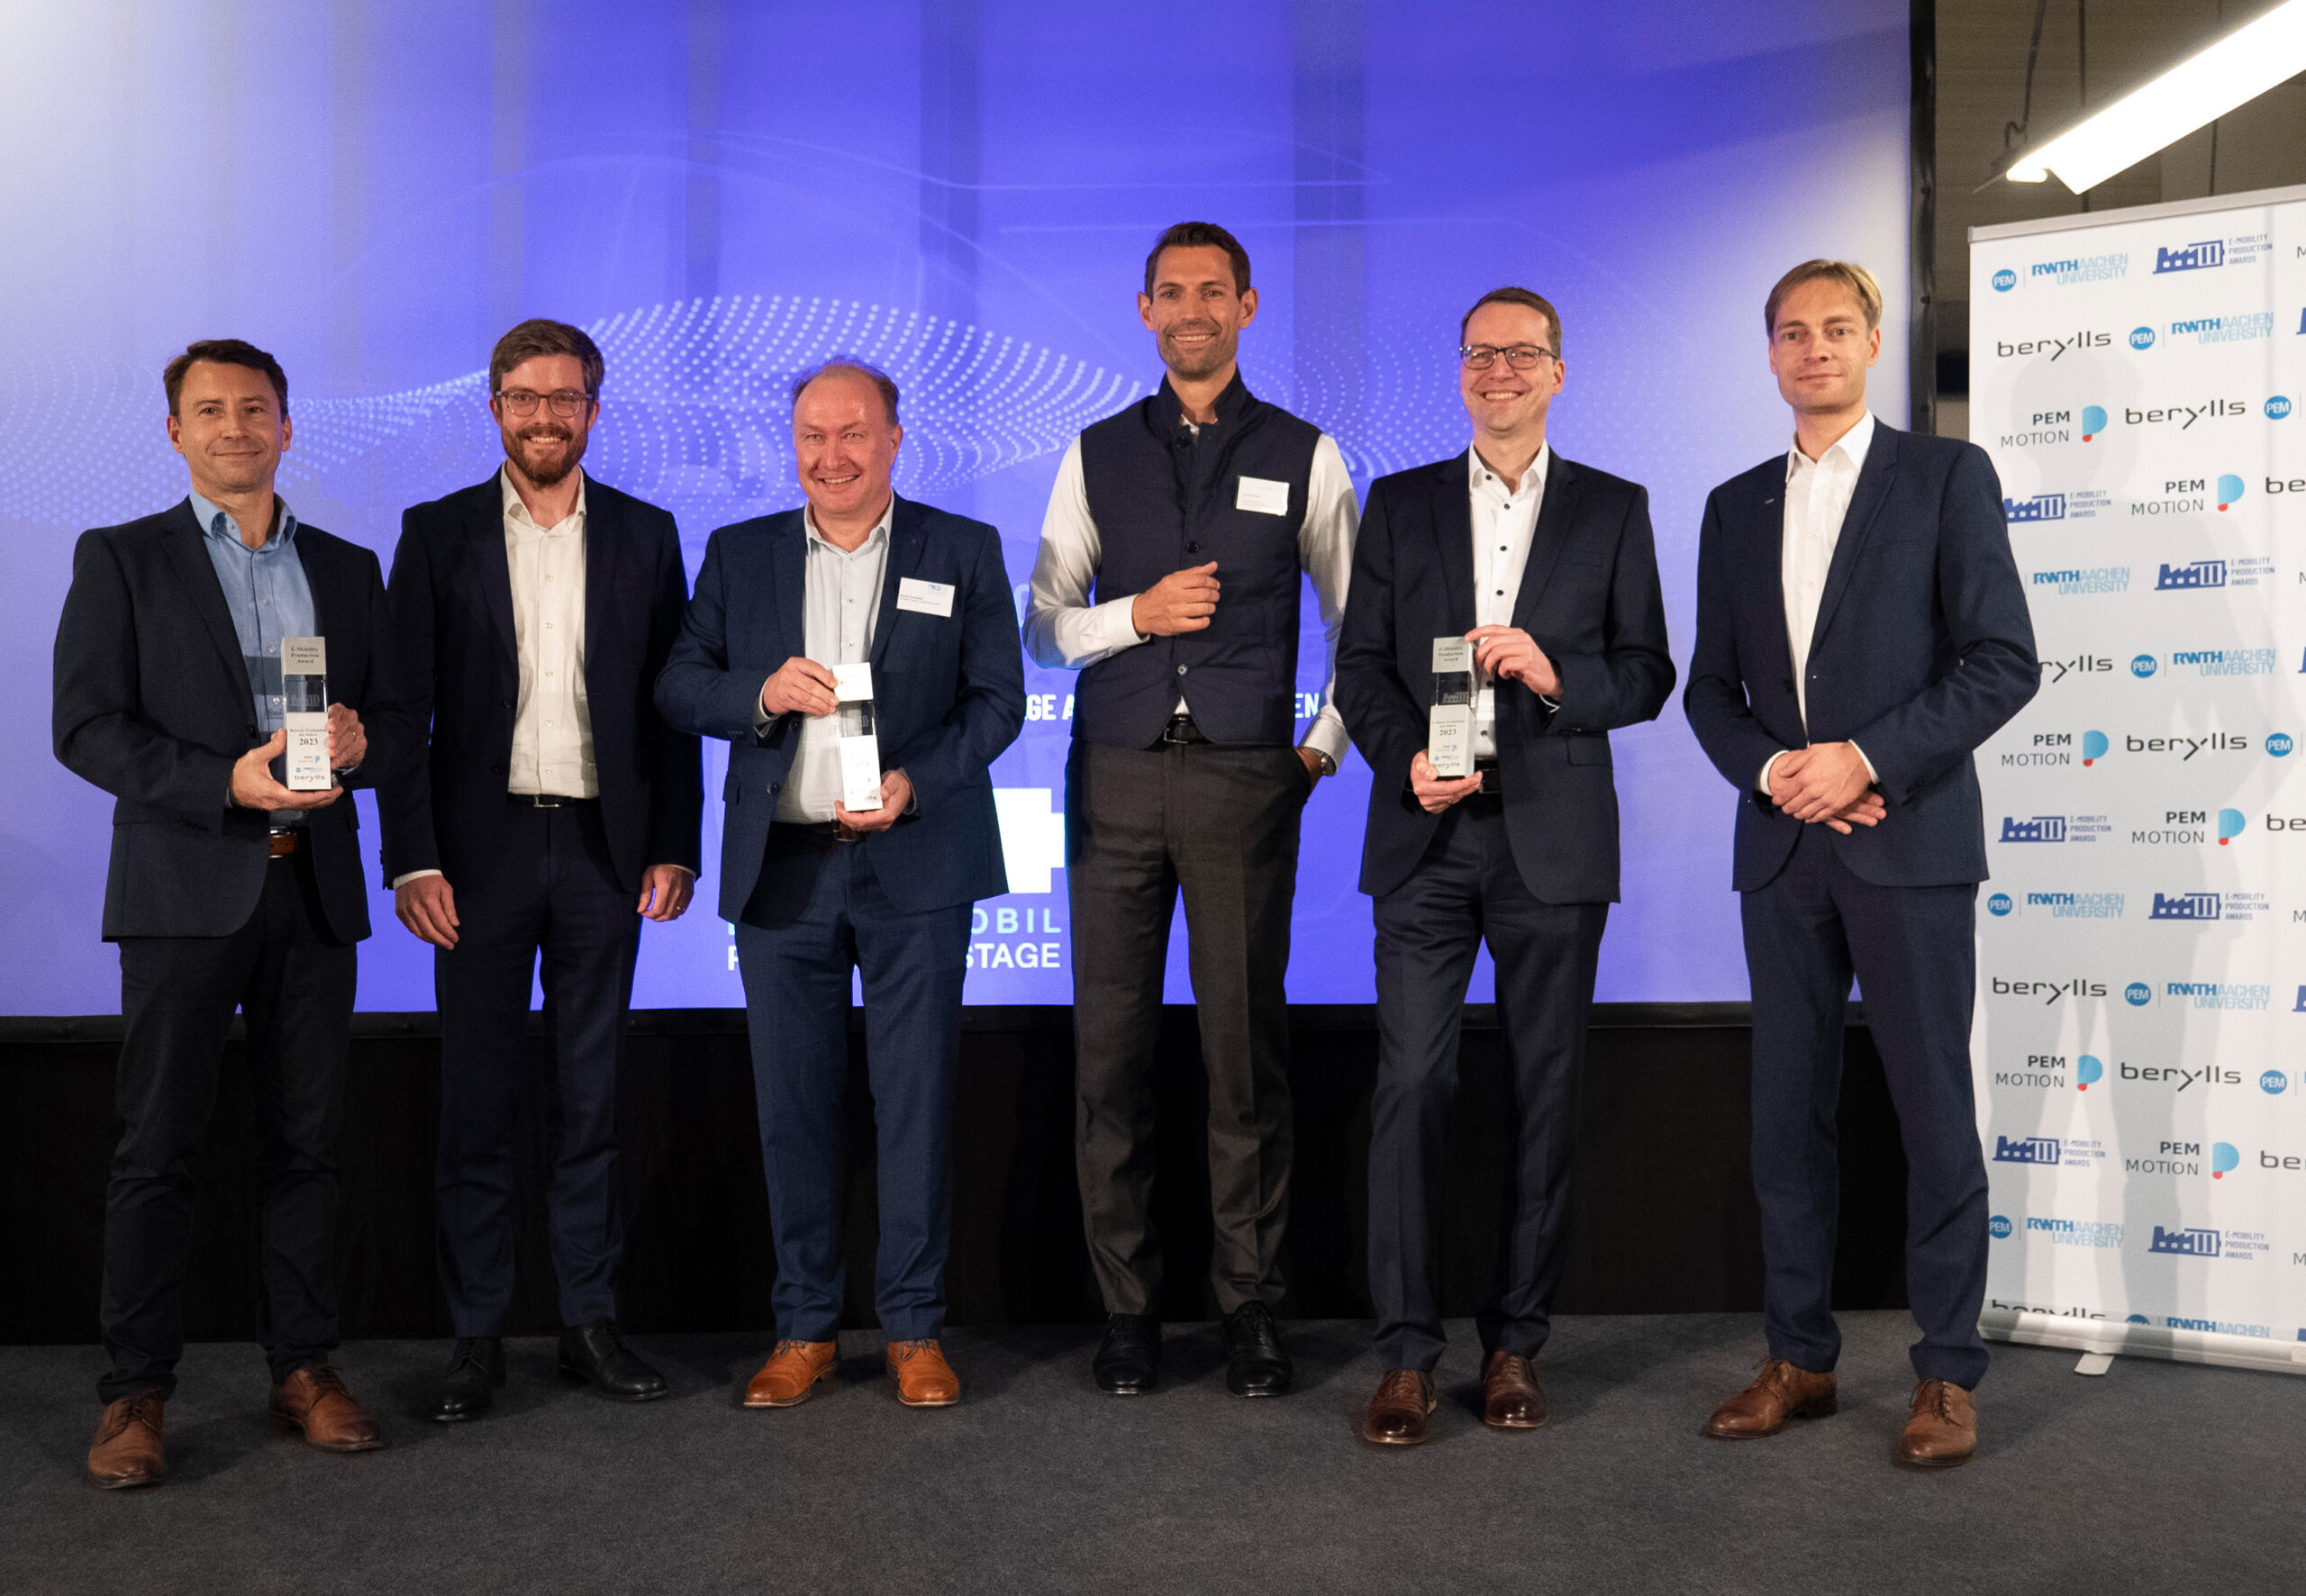 BMW and Bosch receive “E-Mobility Production Awards